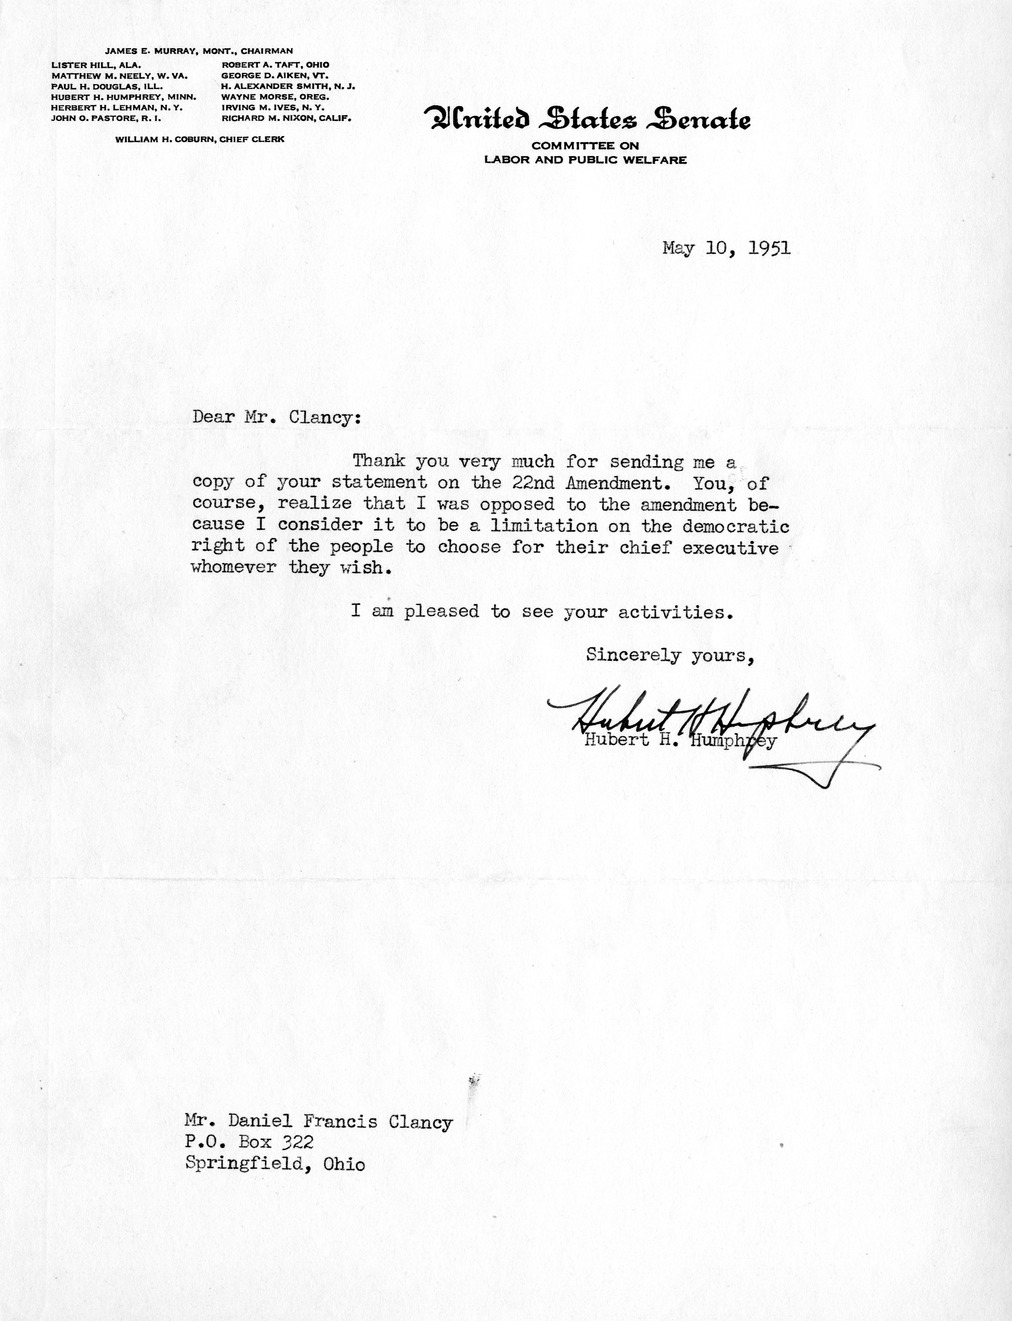 Letter from Hubert H. Humphrey to Daniel F. Clancy